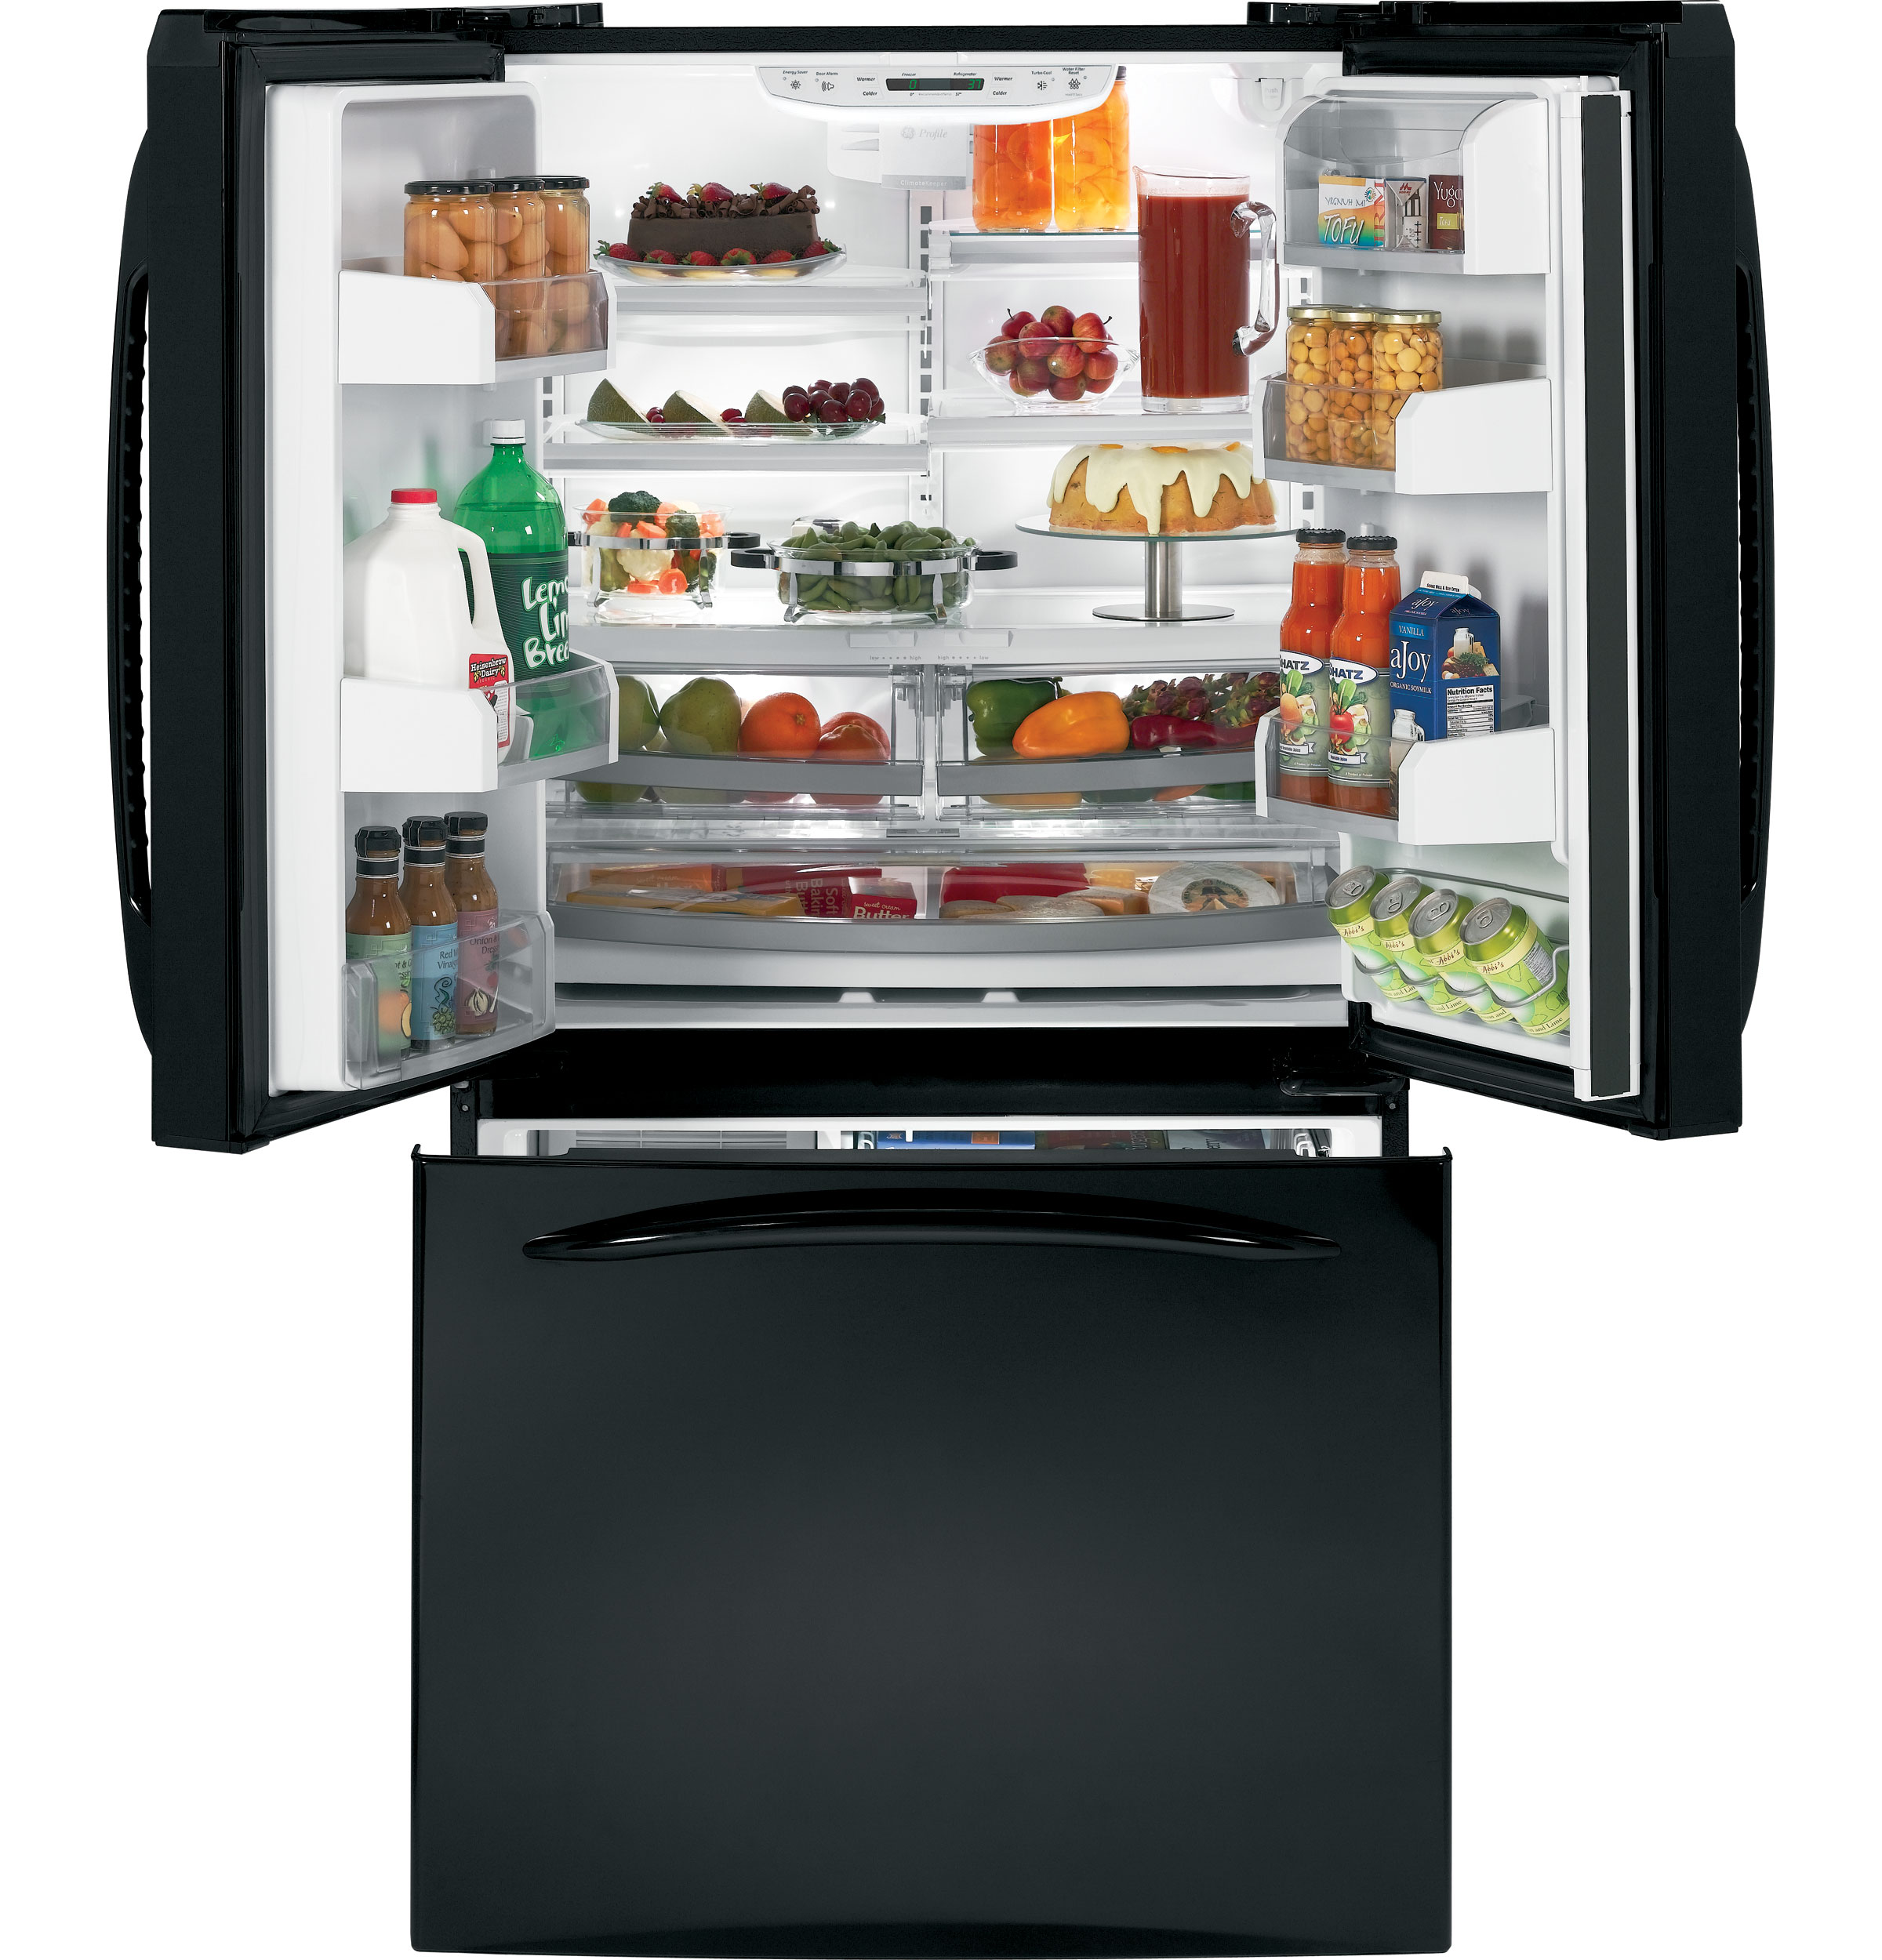 GE Profile™ ENERGY STAR® 25.1 Cu. Ft. French-Door Refrigerator with Icemaker